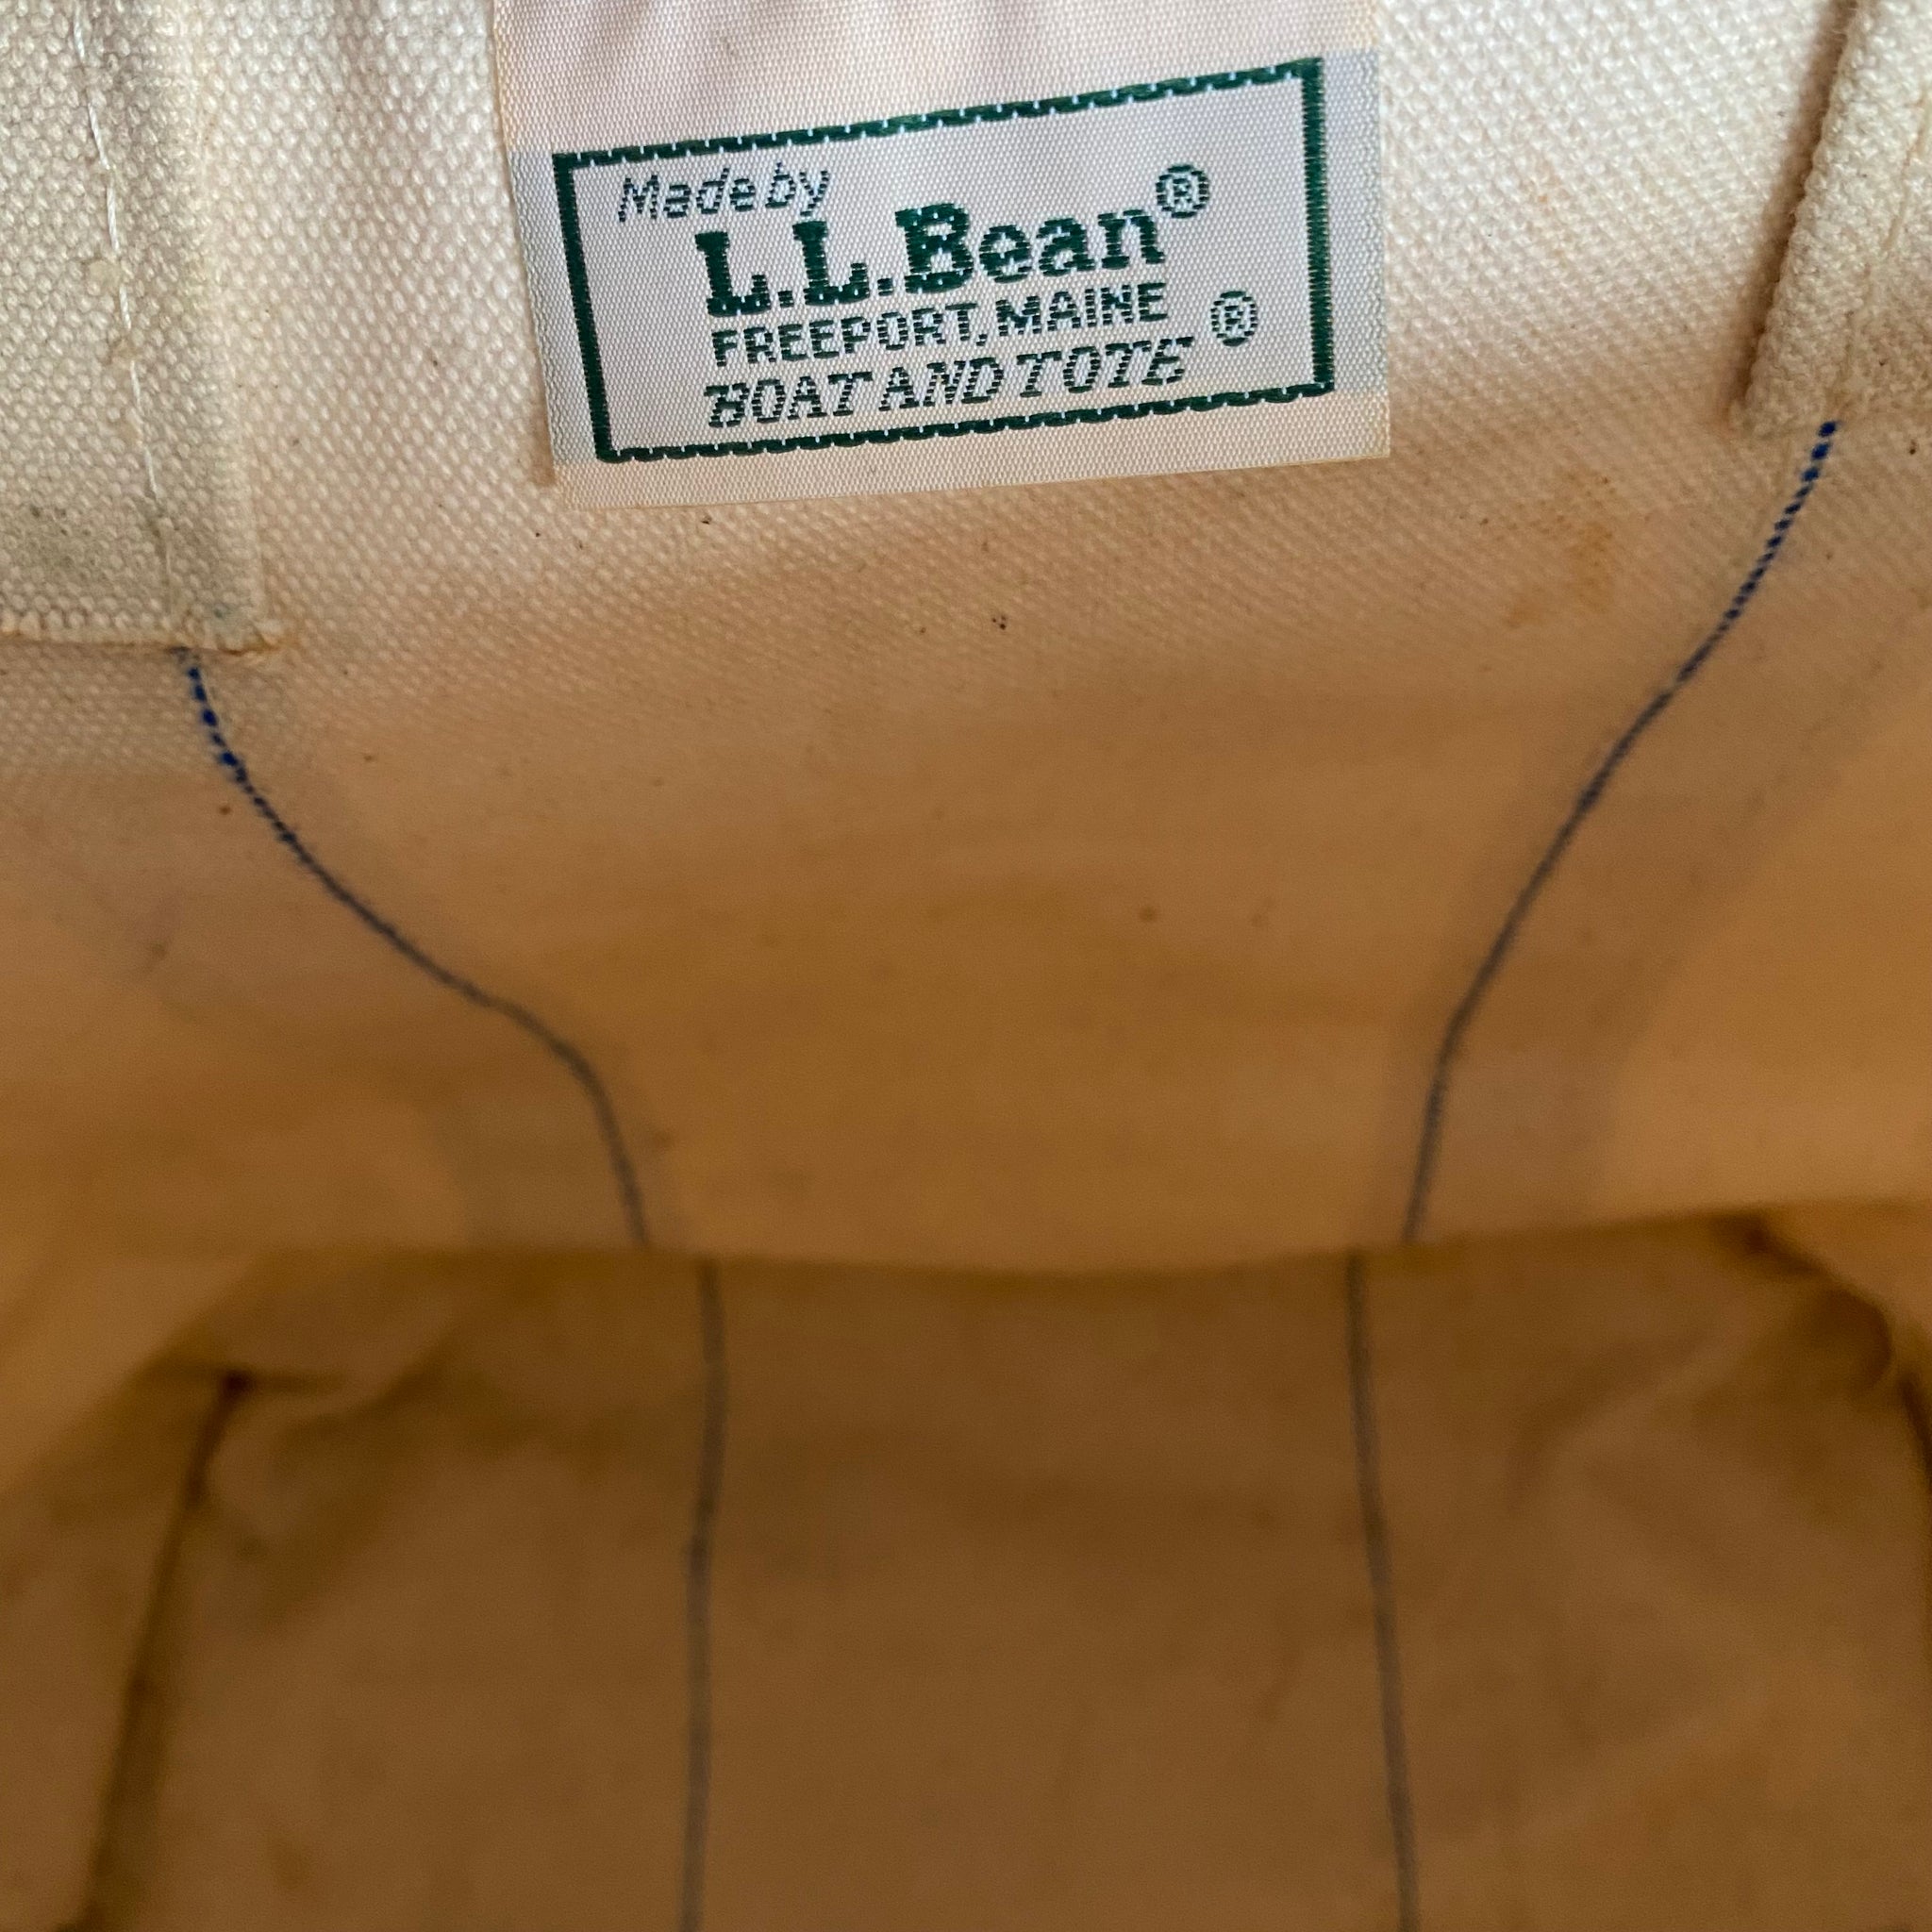 90s “Minet” LL Bean boat and tote Mid size 16x11